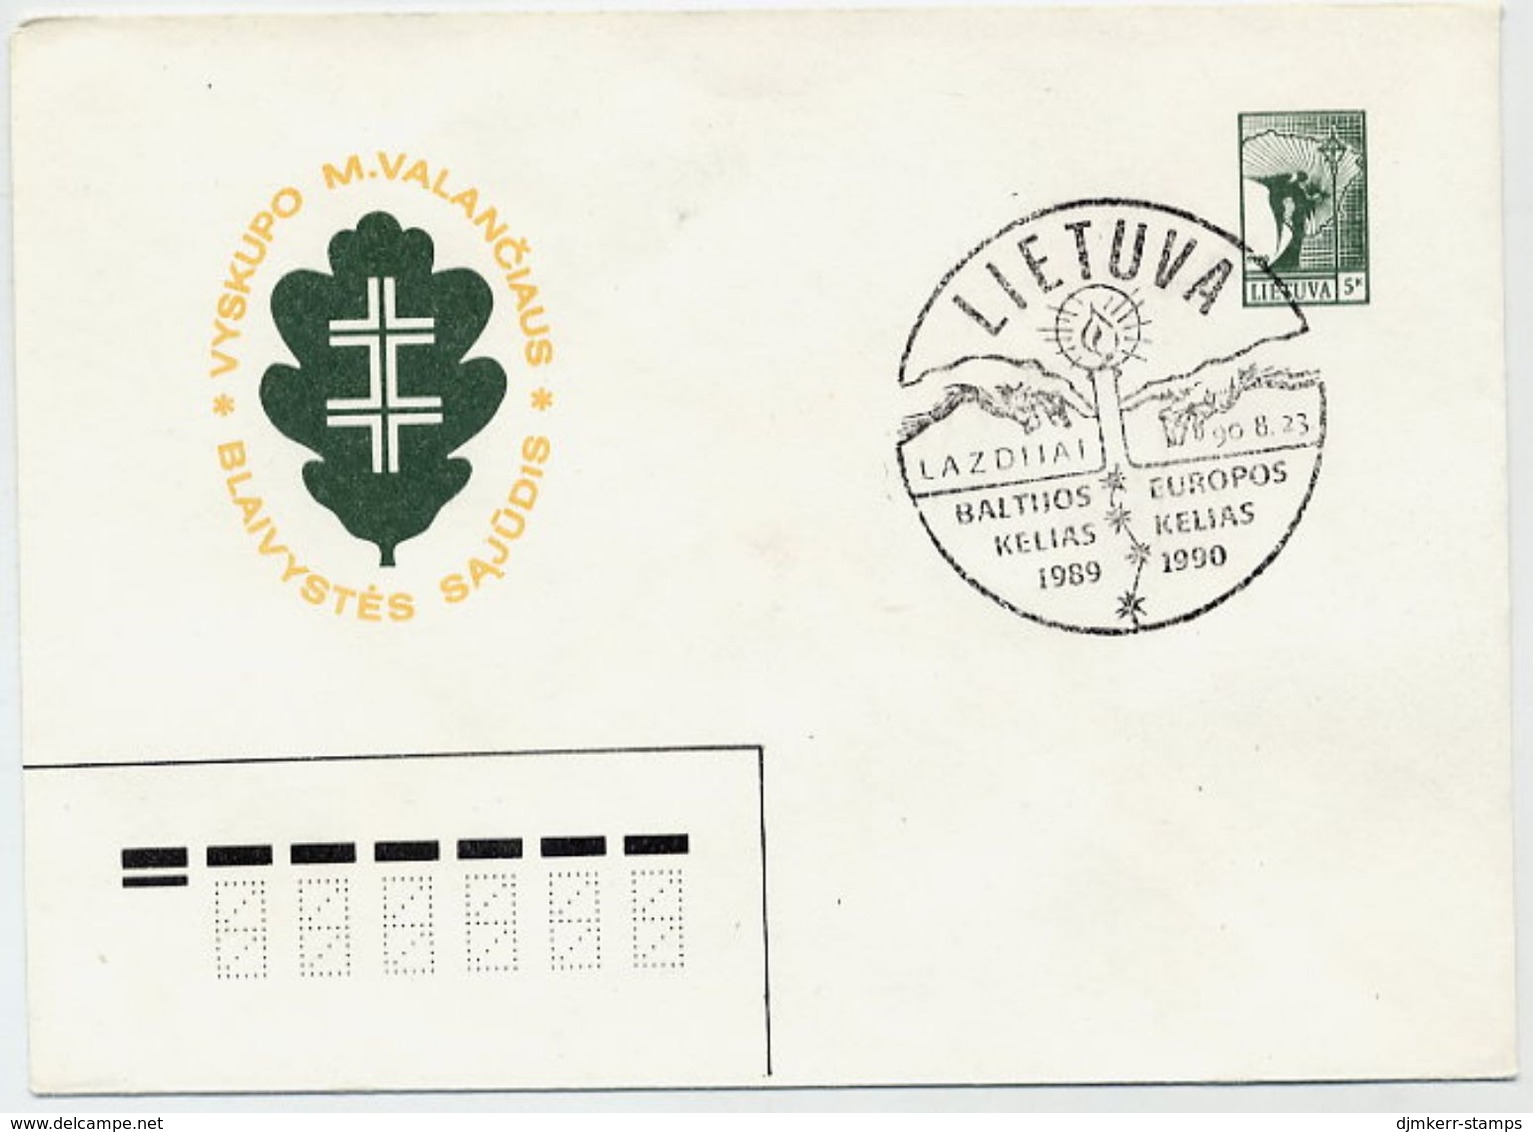 LITHUANIA 1990 Abstinence Movement Stationery Envelope, Cancelled.  Michel U6 - Lituania